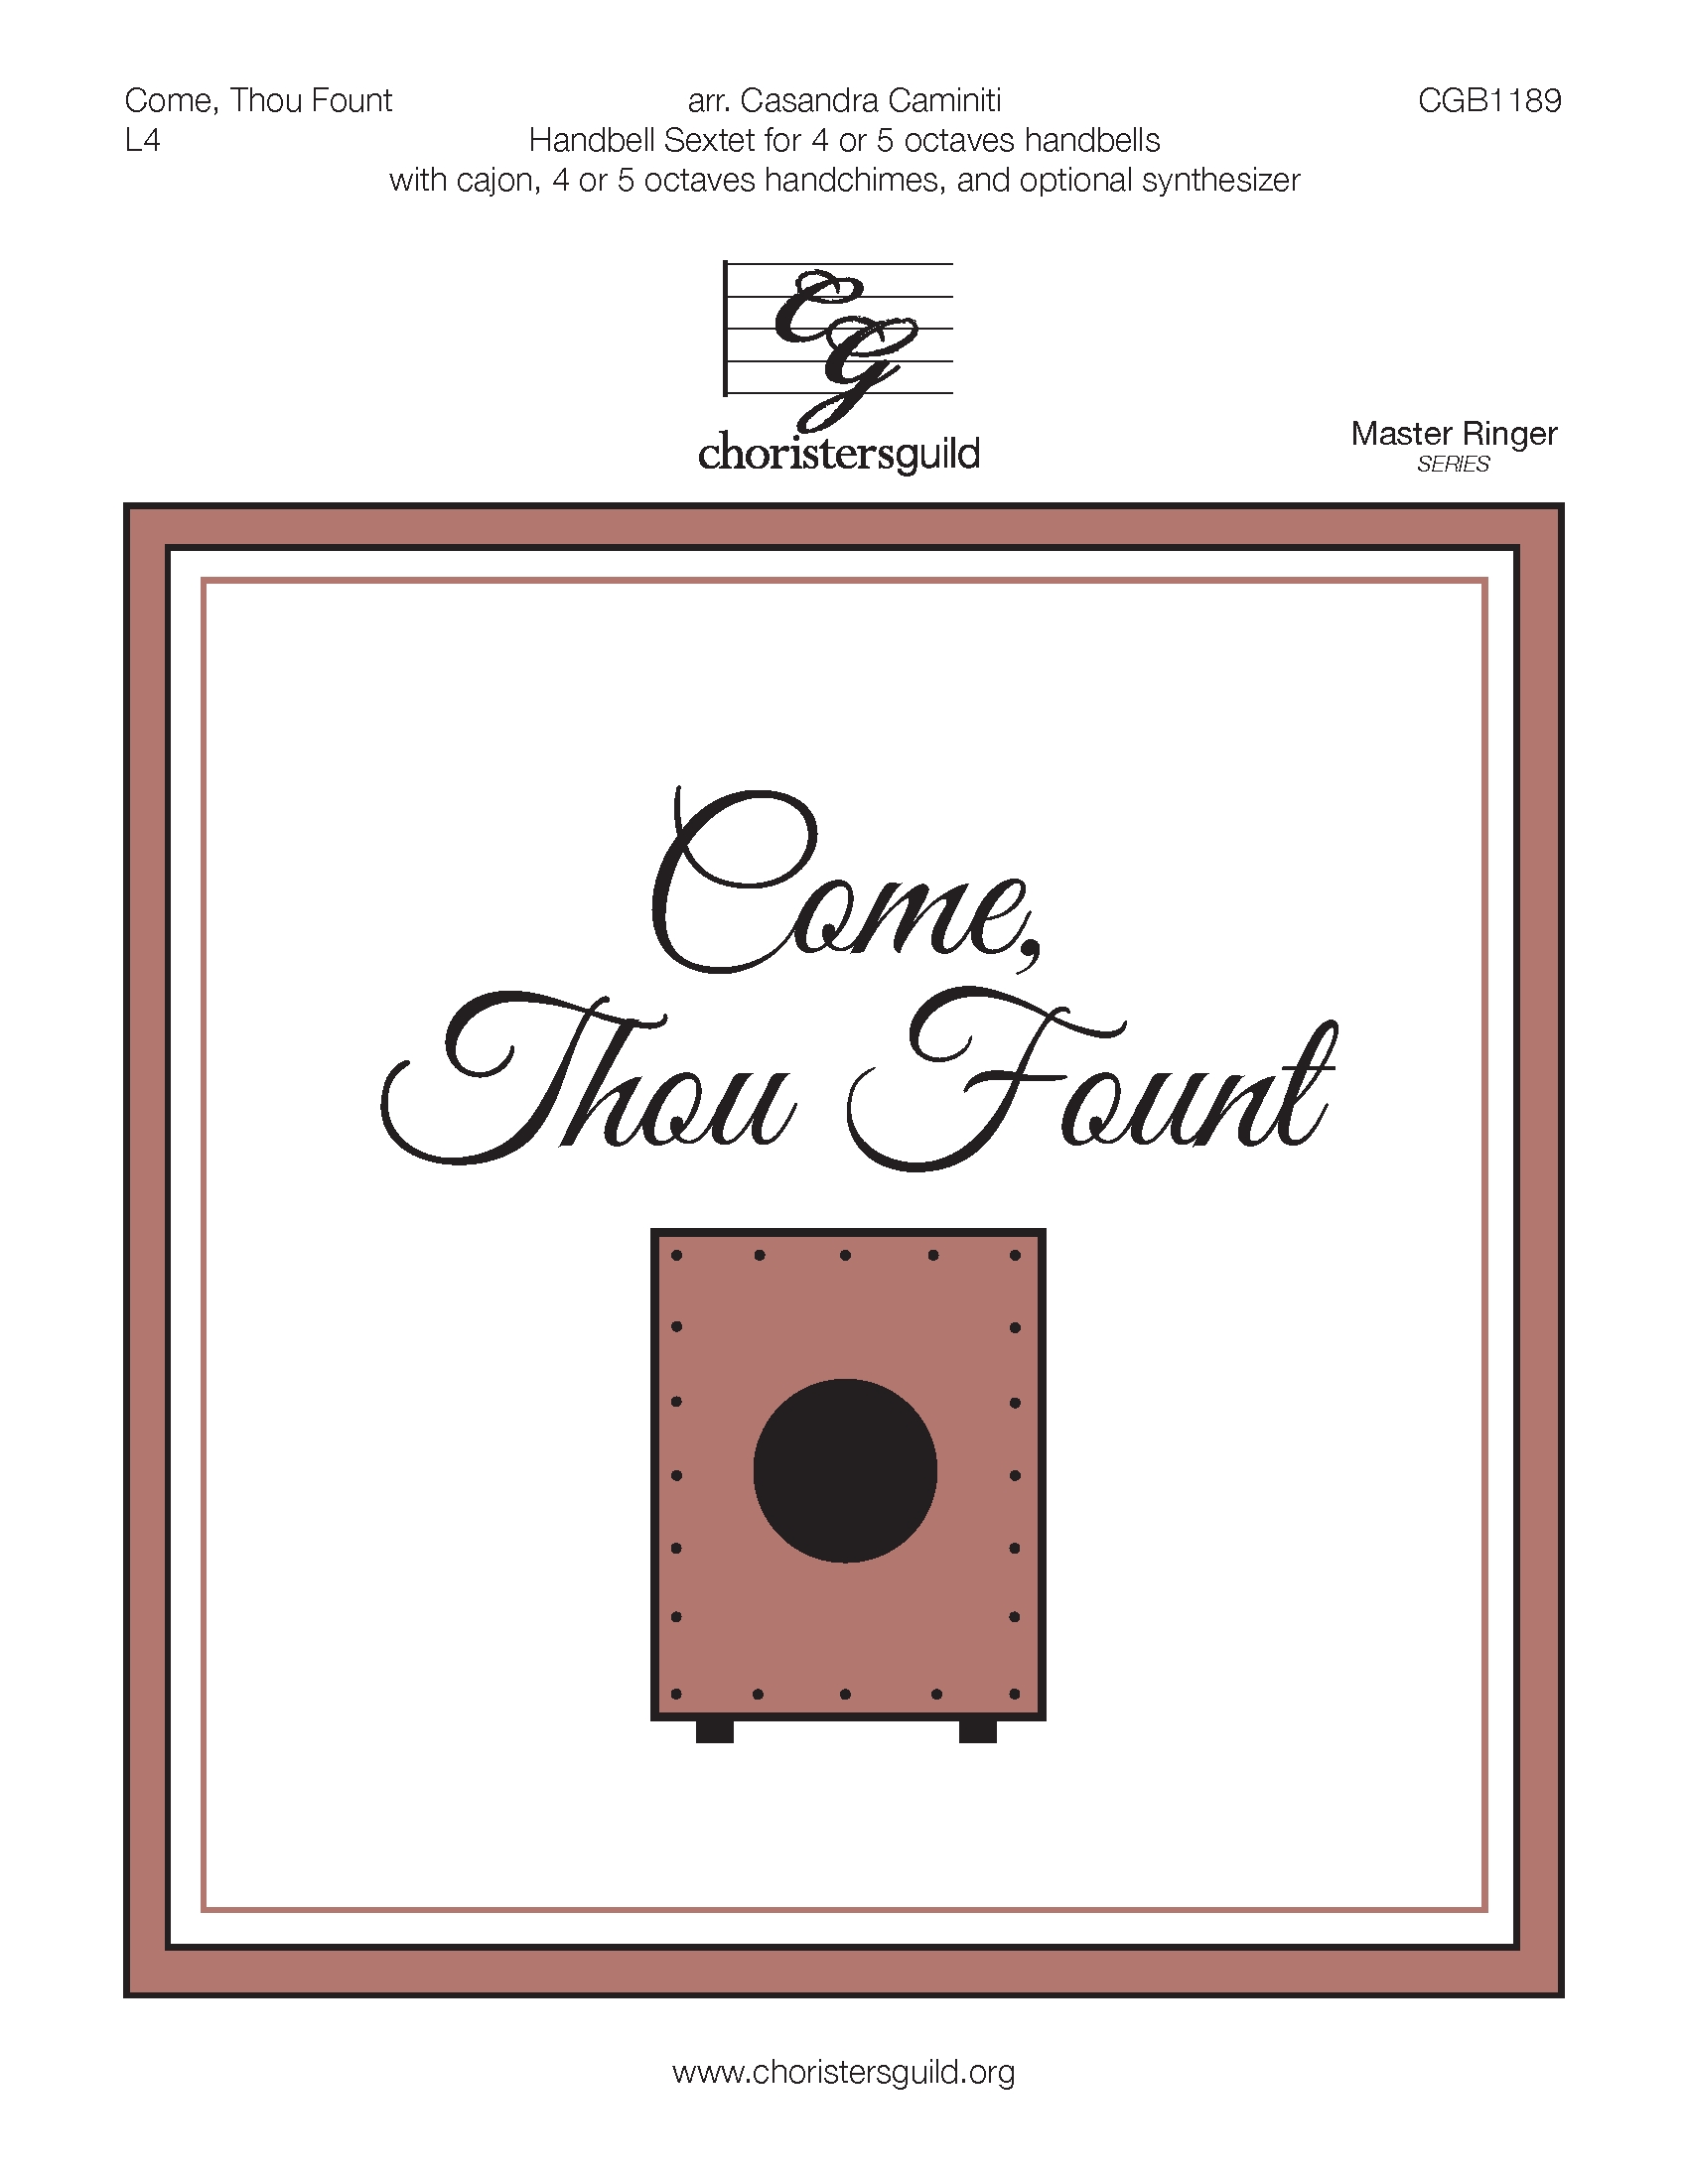 Come, Thou Fount (sextet)